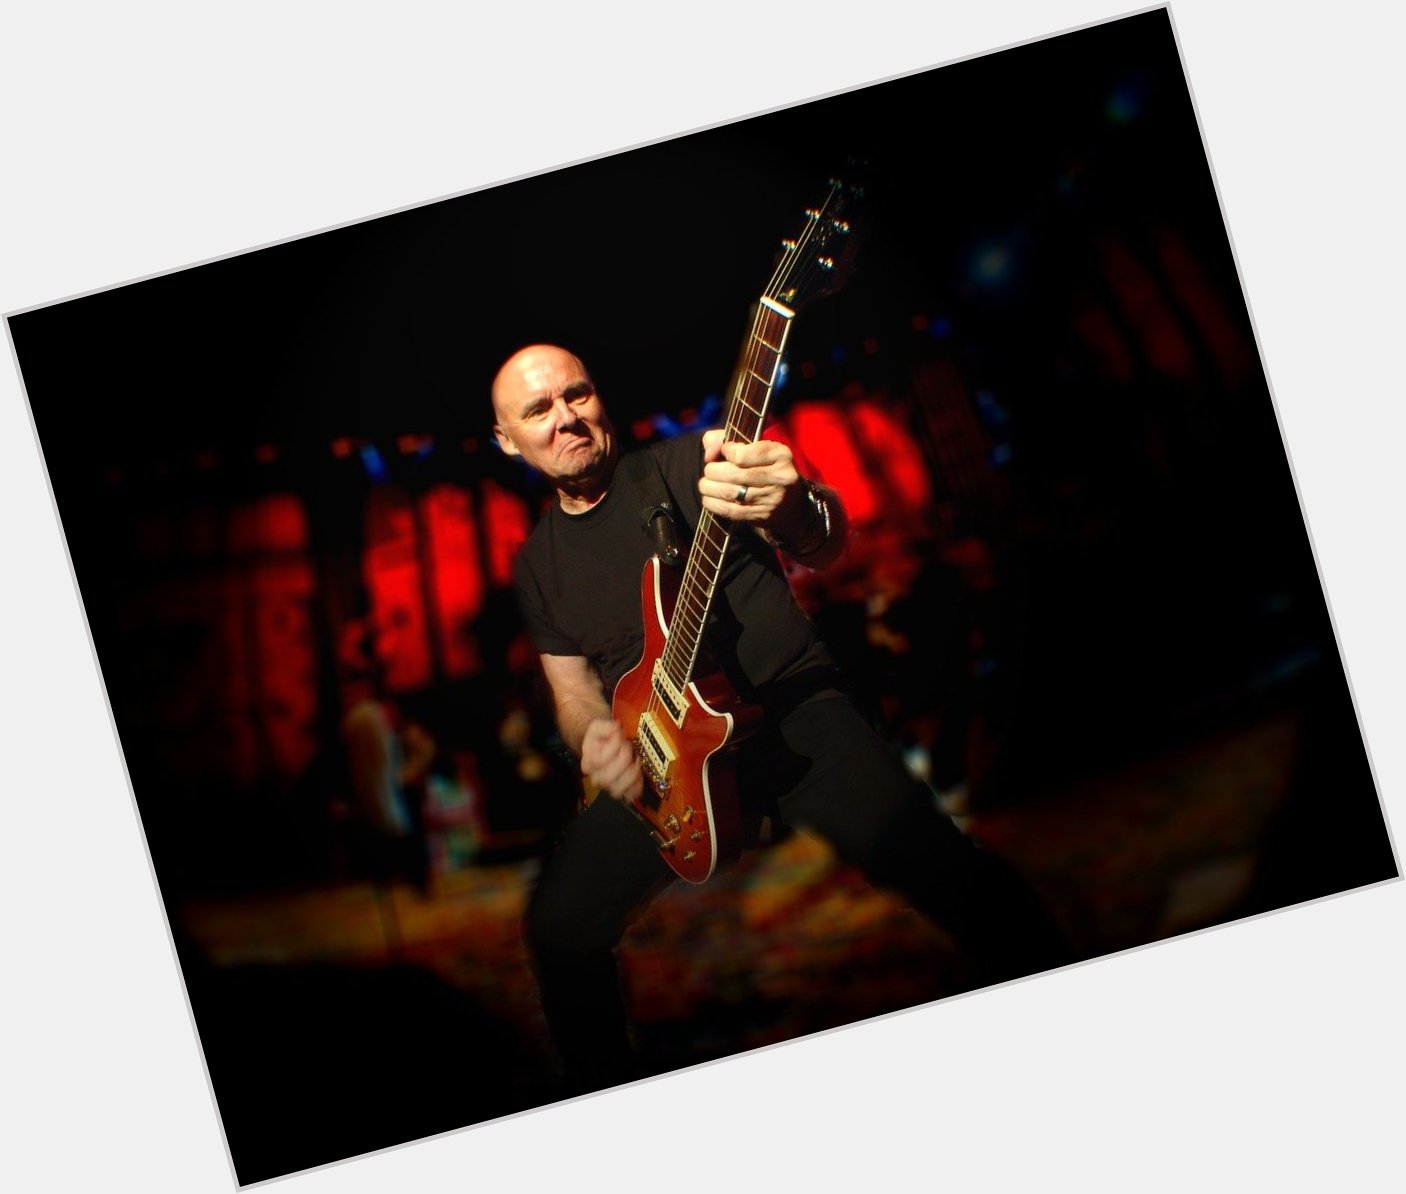 Happy Birthday to the late, great Ronnie Montrose, born 11/29/1947.  